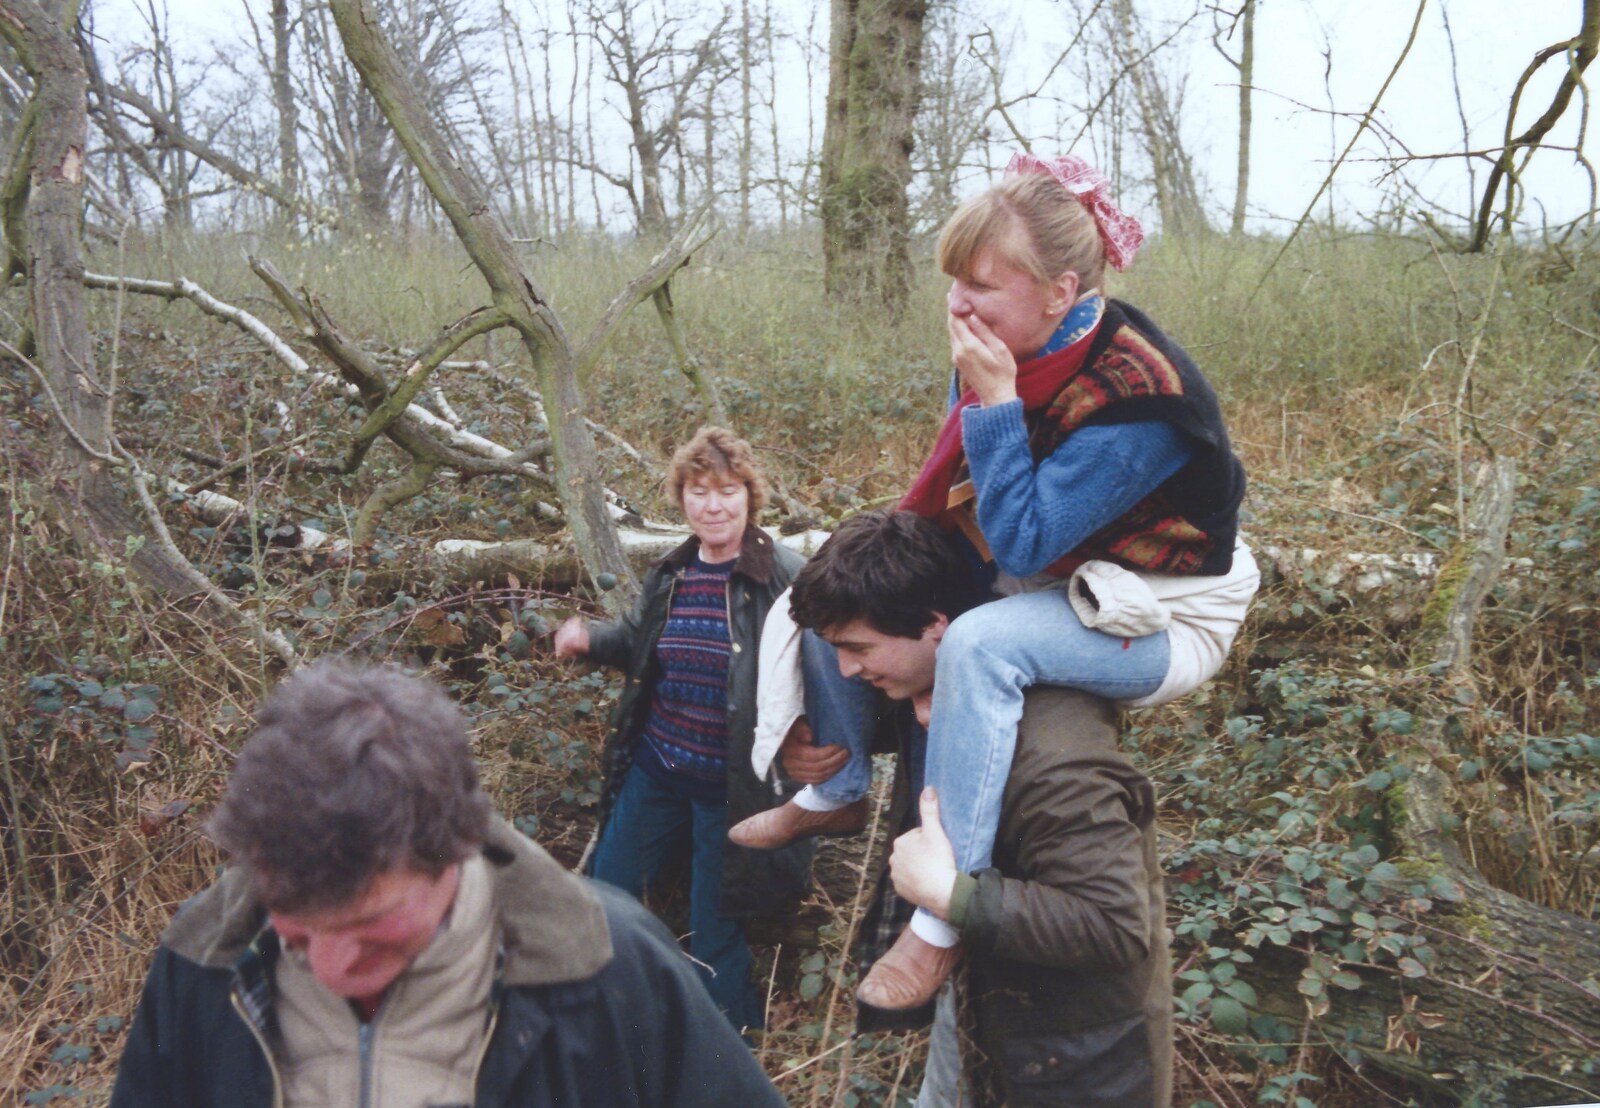 Janet gets a piggy-back from A Walk in Tyrrel's Wood, Pulham St. Mary, Norfolk - 23rd February 1991